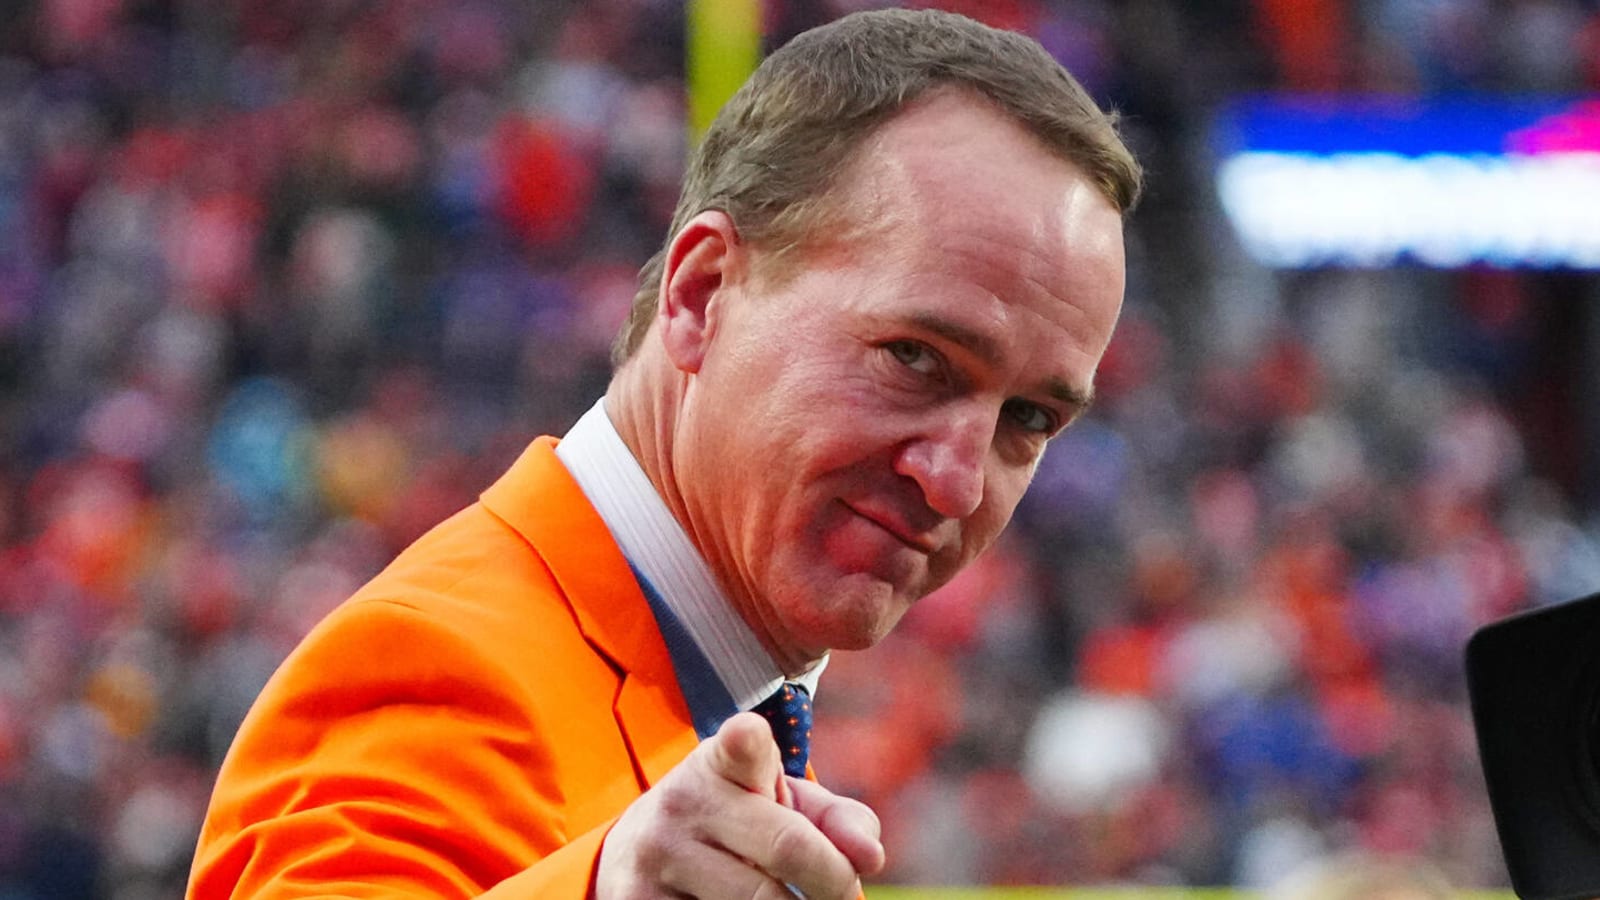 Report: Potential Broncos' buyers looking to involve Peyton Manning